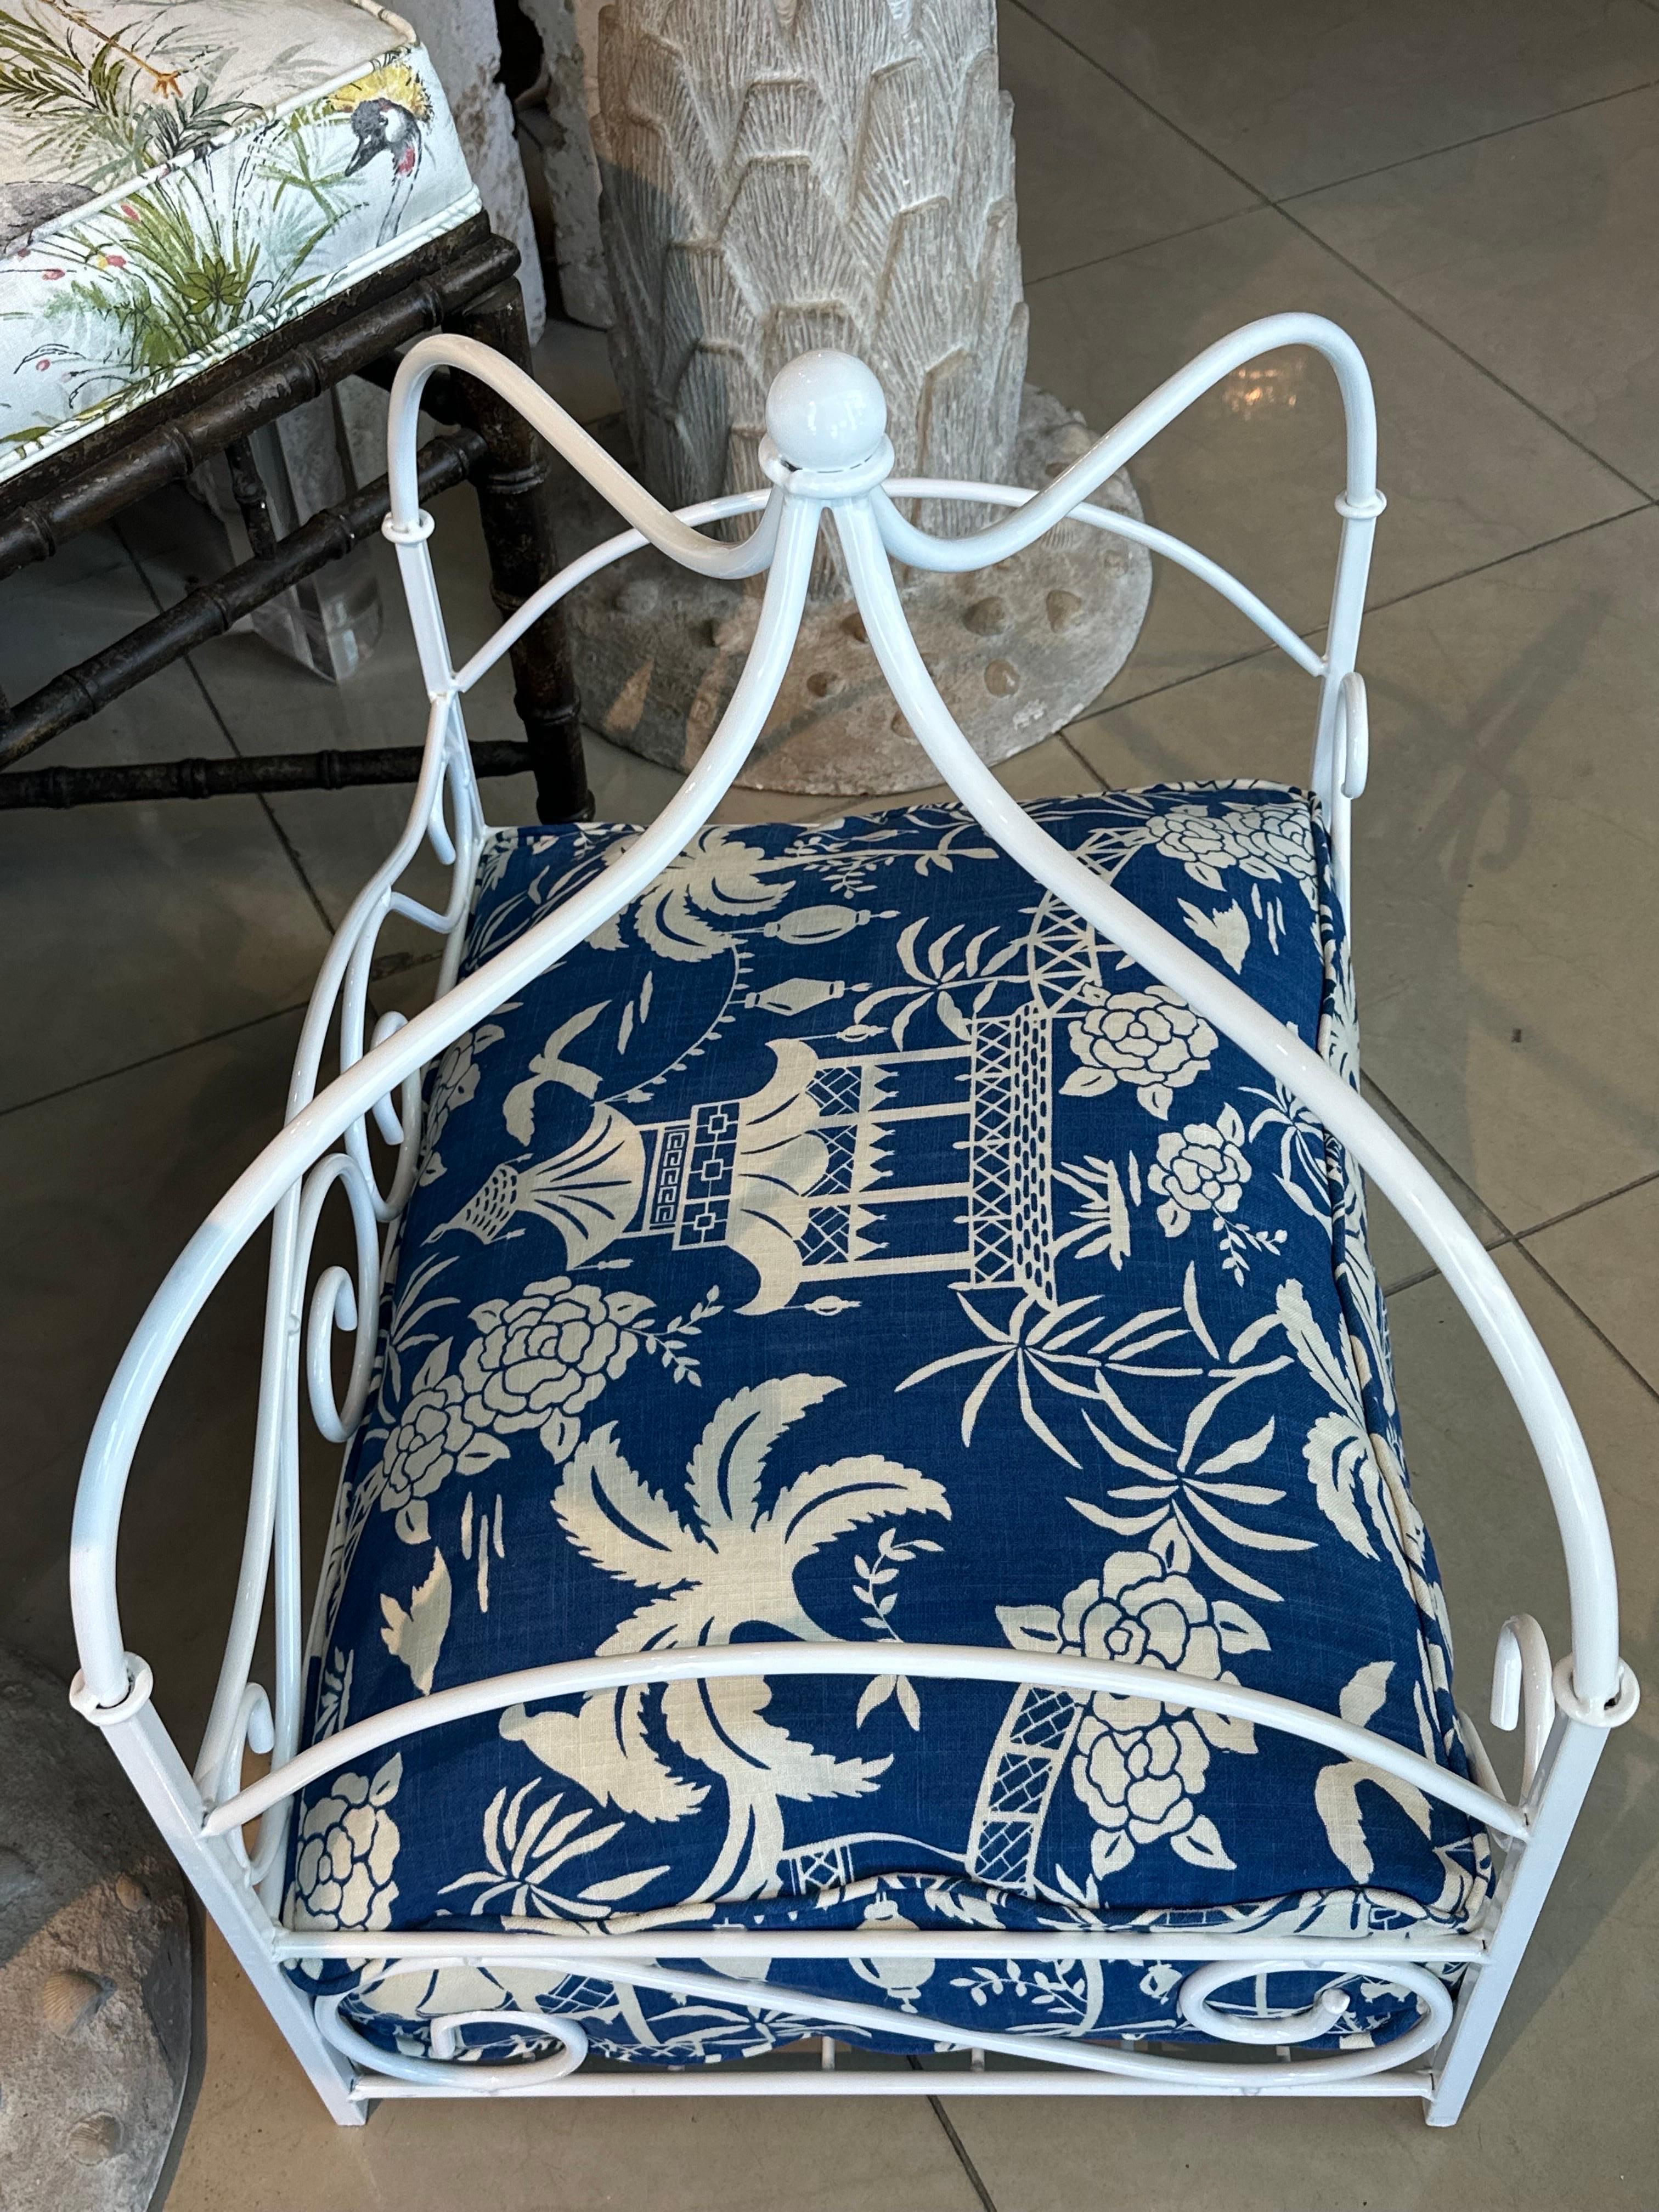 Vintage Newly Finished Upholstered Metal Canopy Dog Pet Bed Palm Beach Pagoda In Good Condition For Sale In West Palm Beach, FL